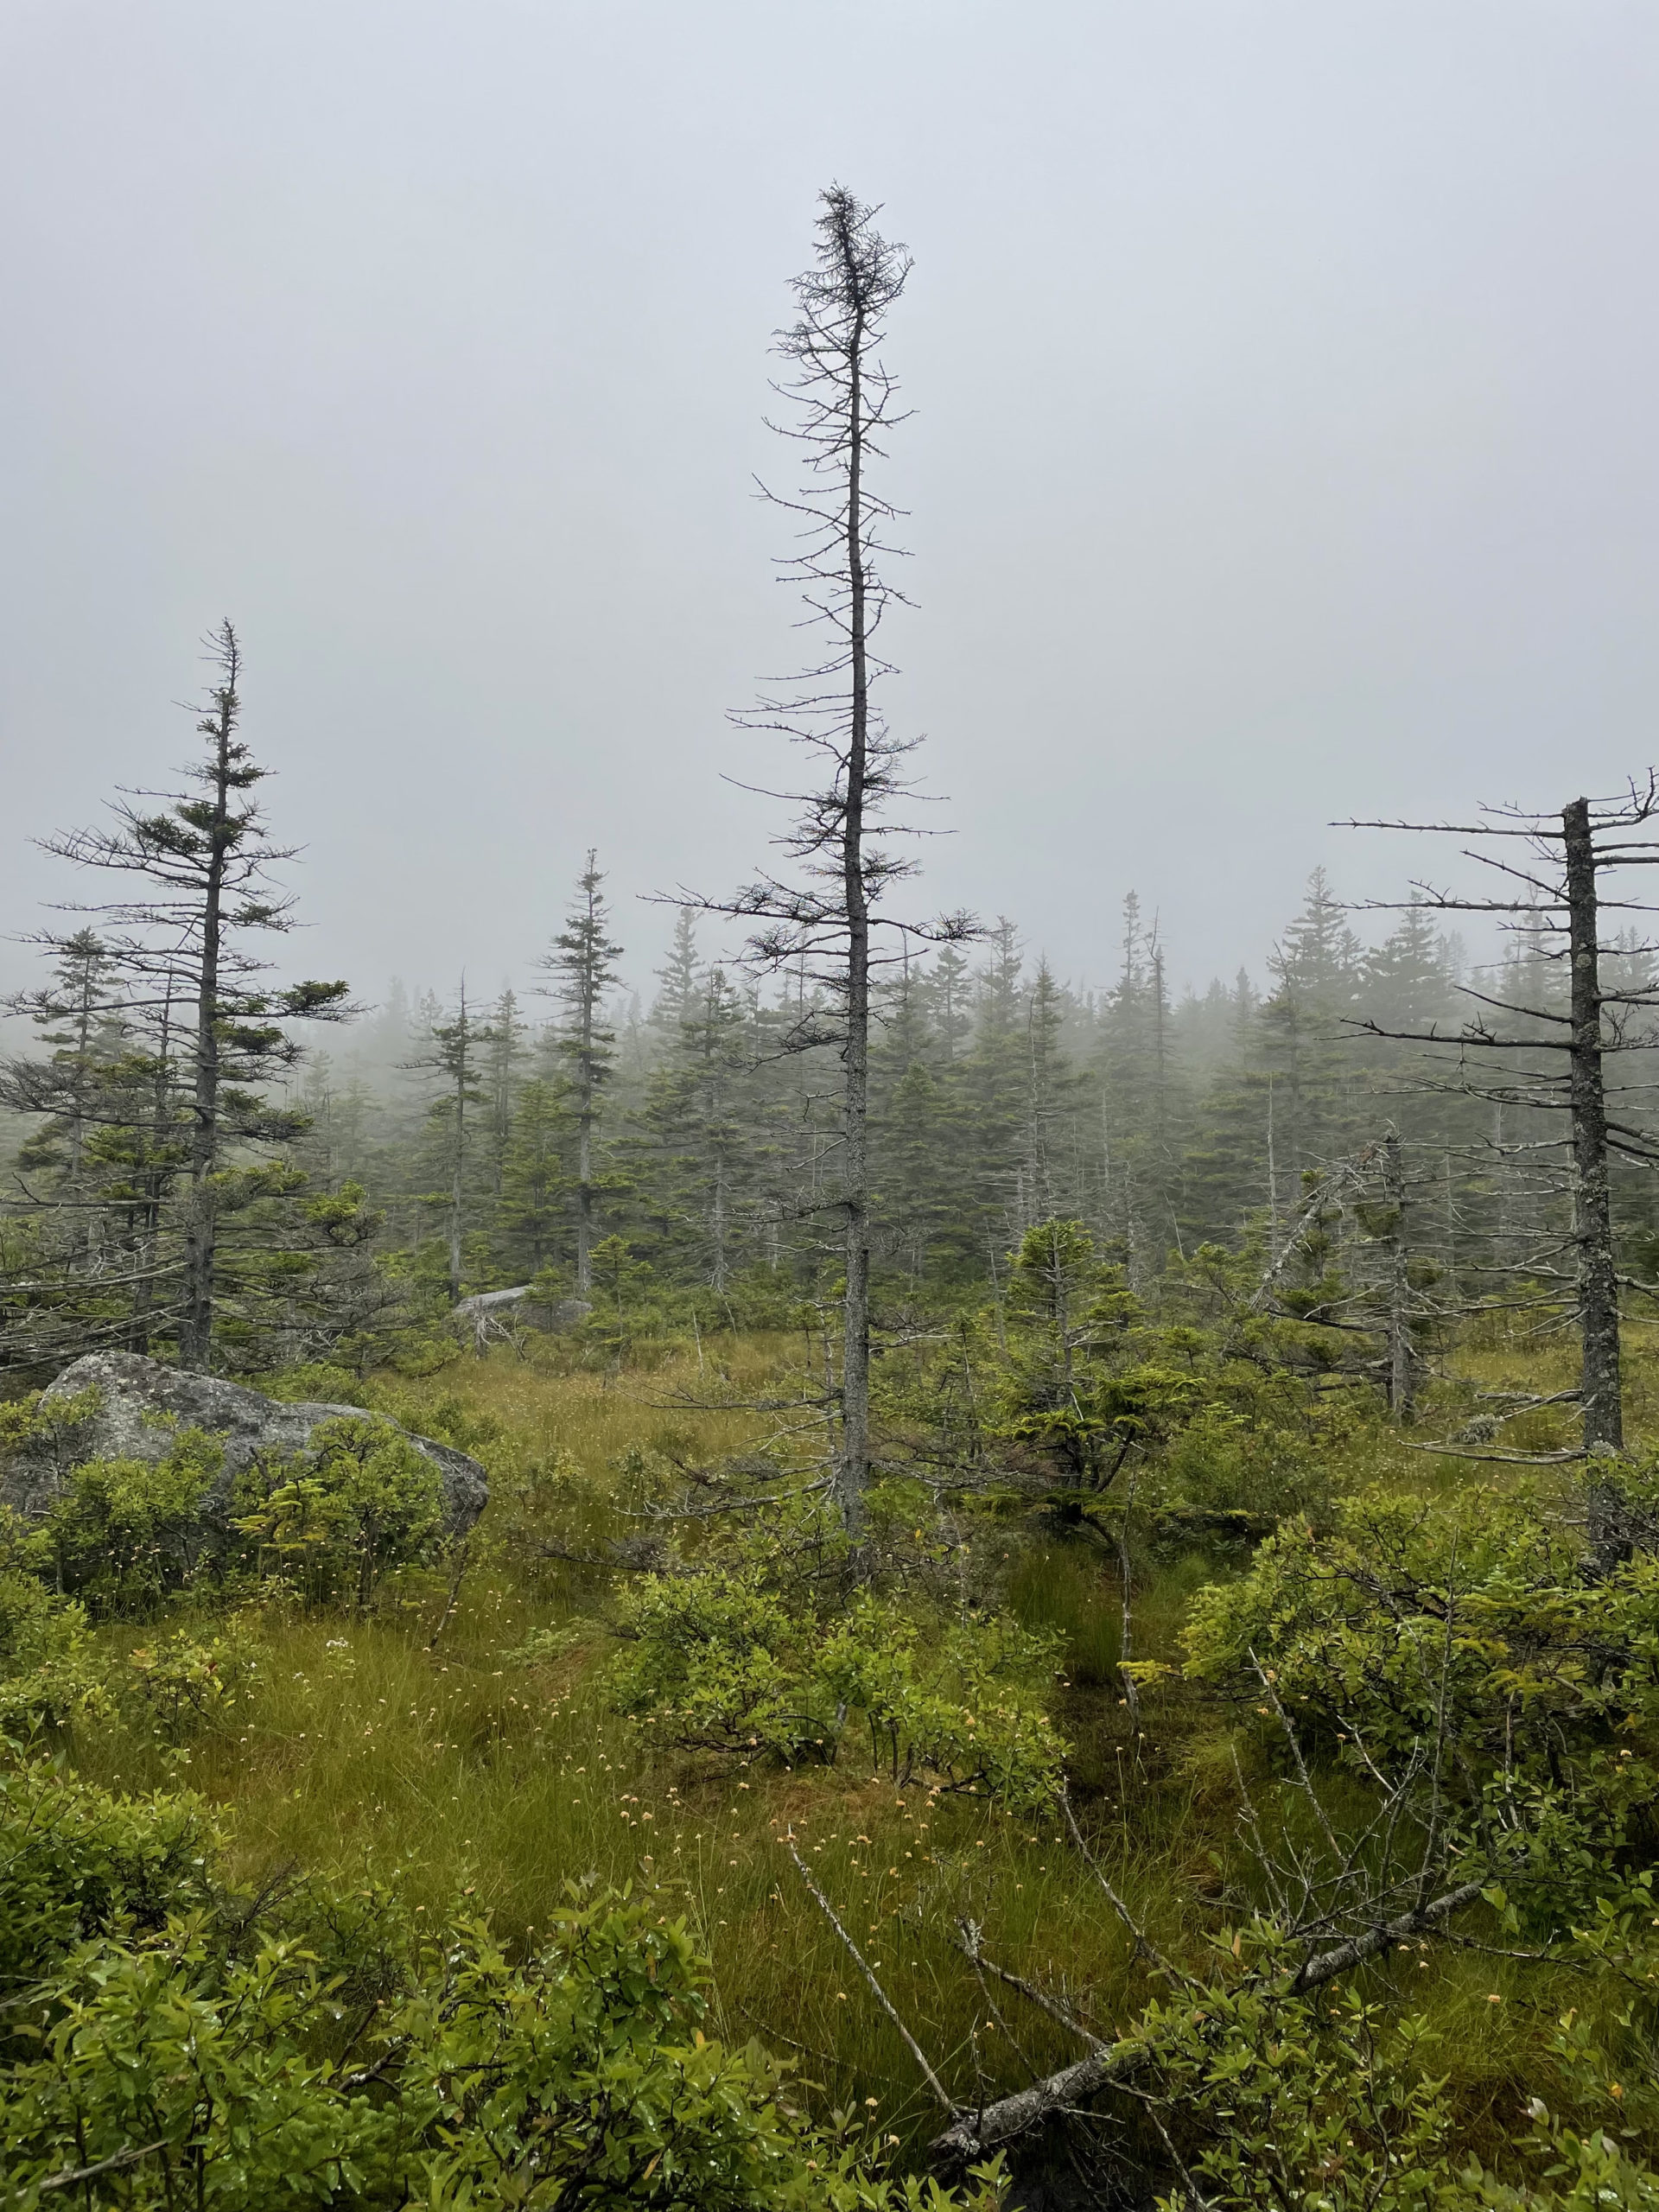 Fog and trees, seen while hiking Mt. Hale and Mt. Zealand in the White Mountain National Forest, New Hampshire